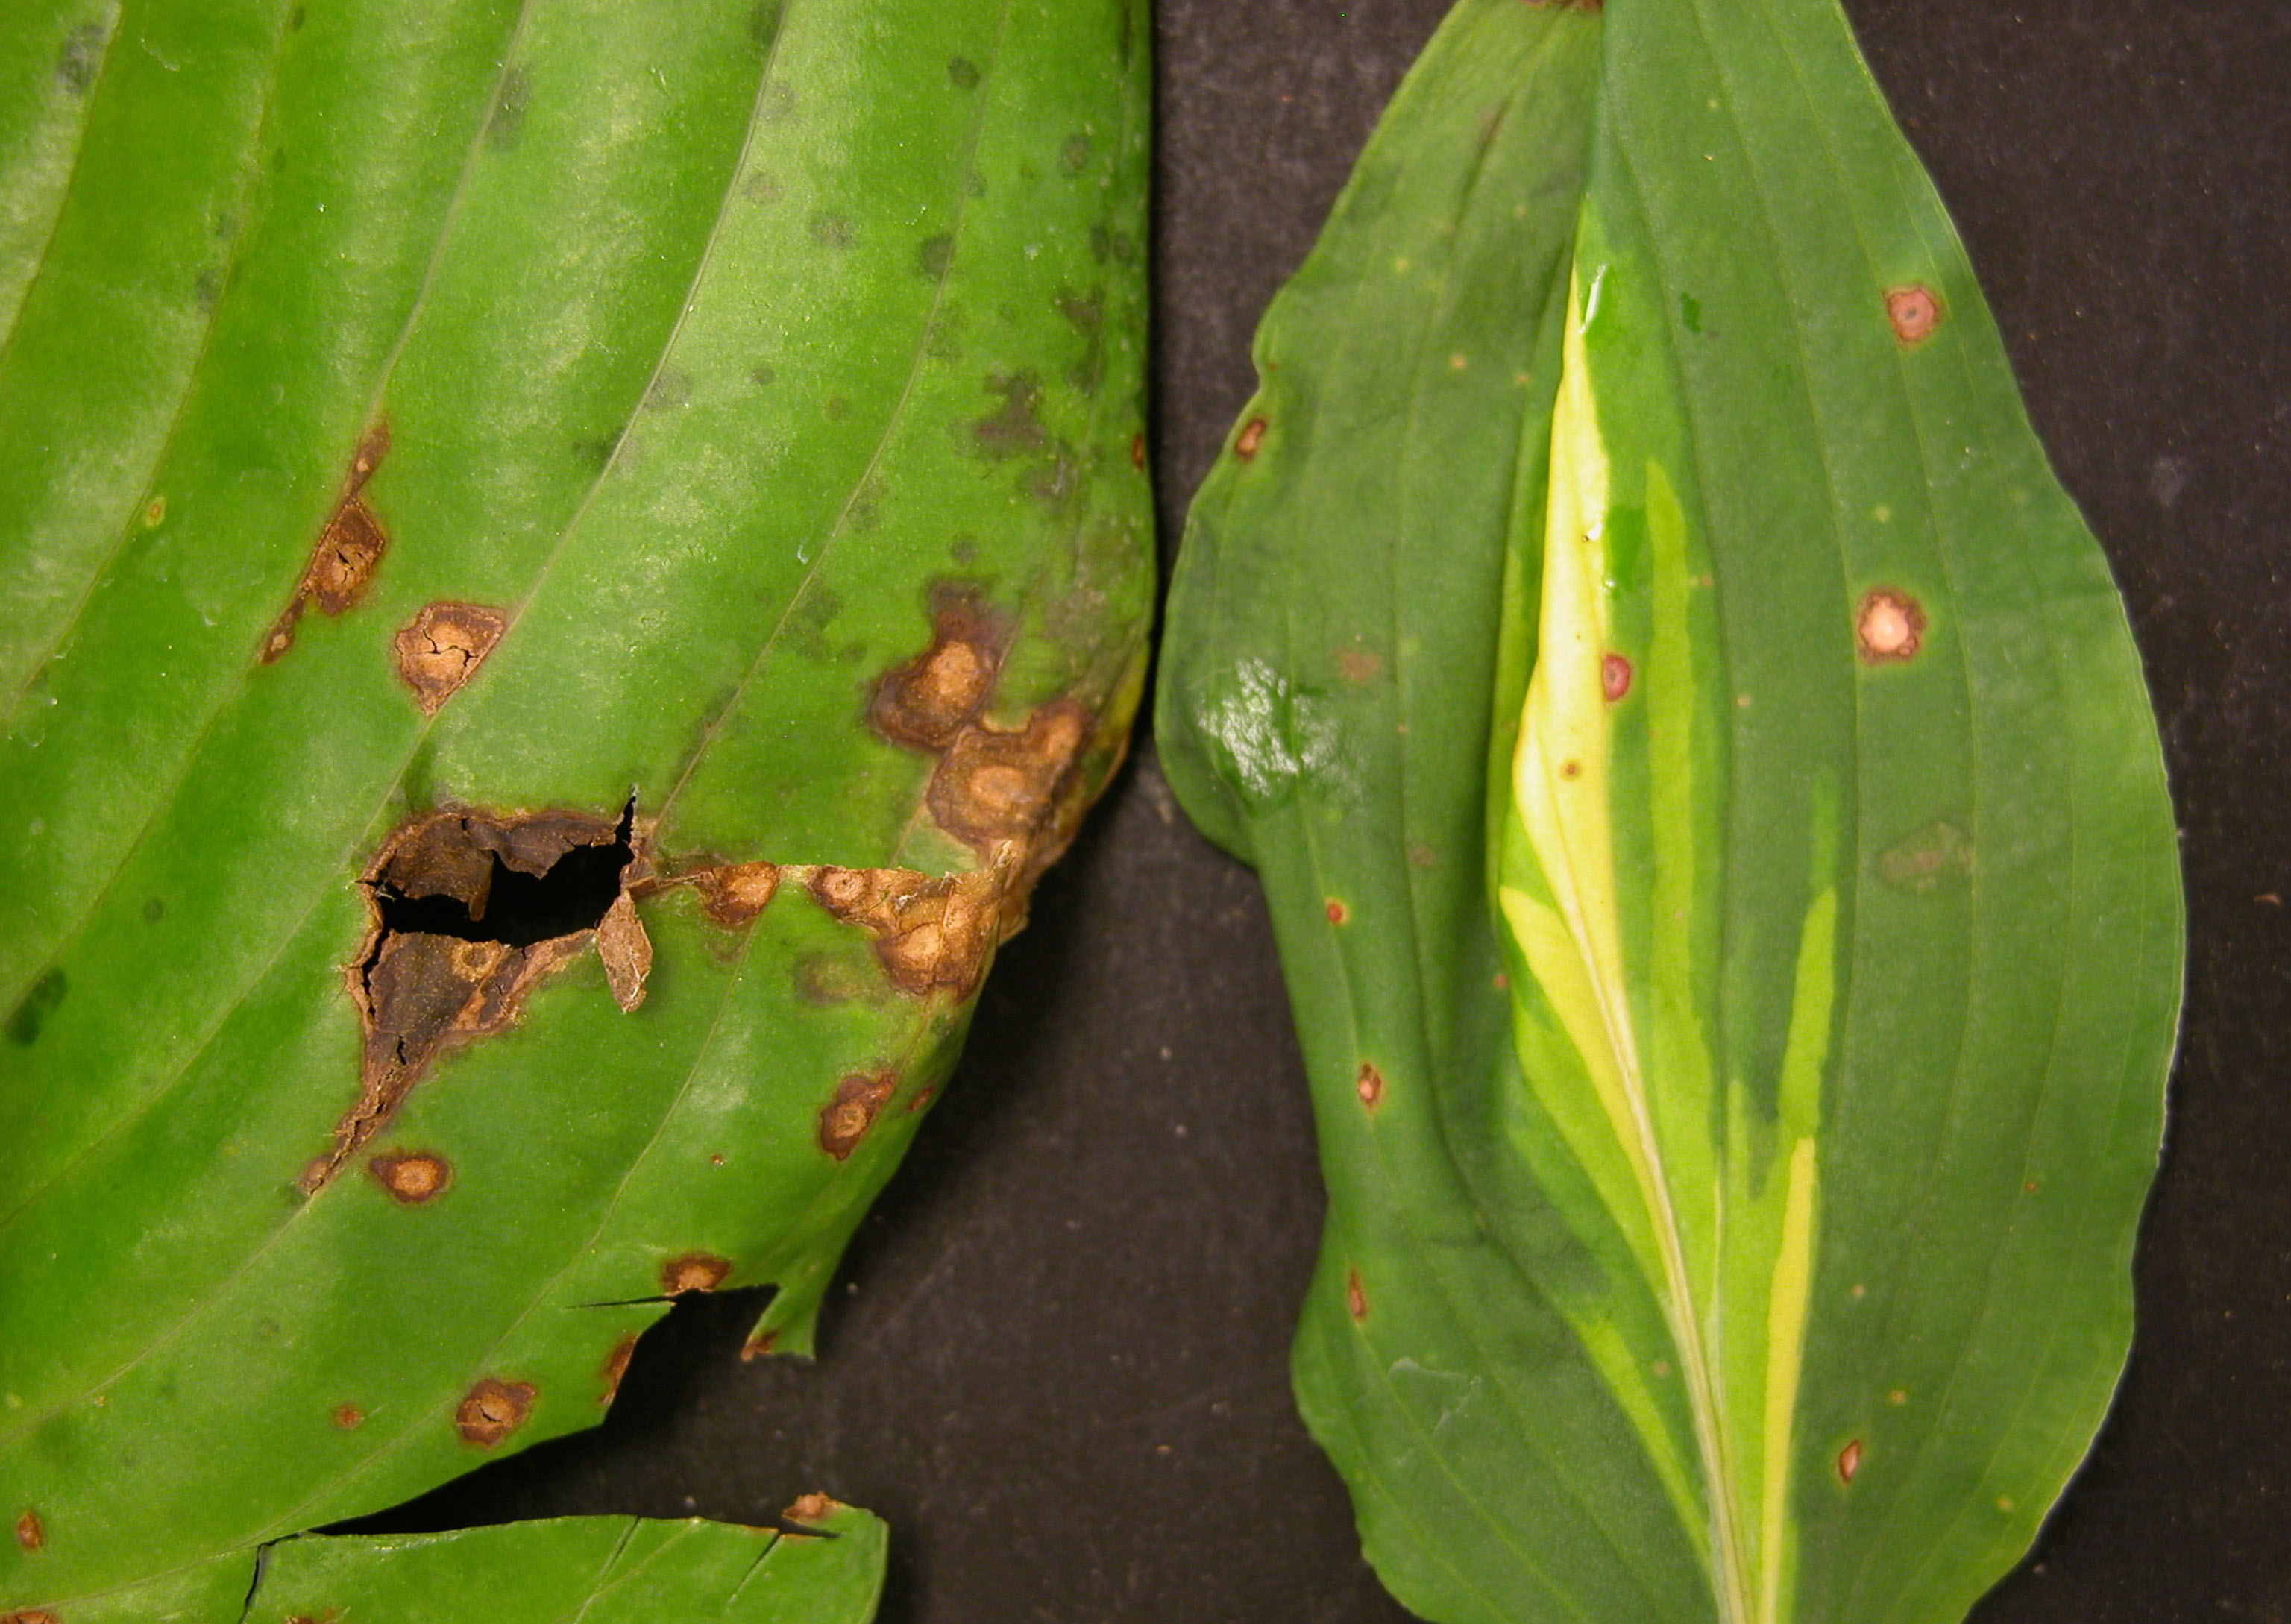 Two hosta leaves with symptoms of anthracnose infection shown on a dark background.